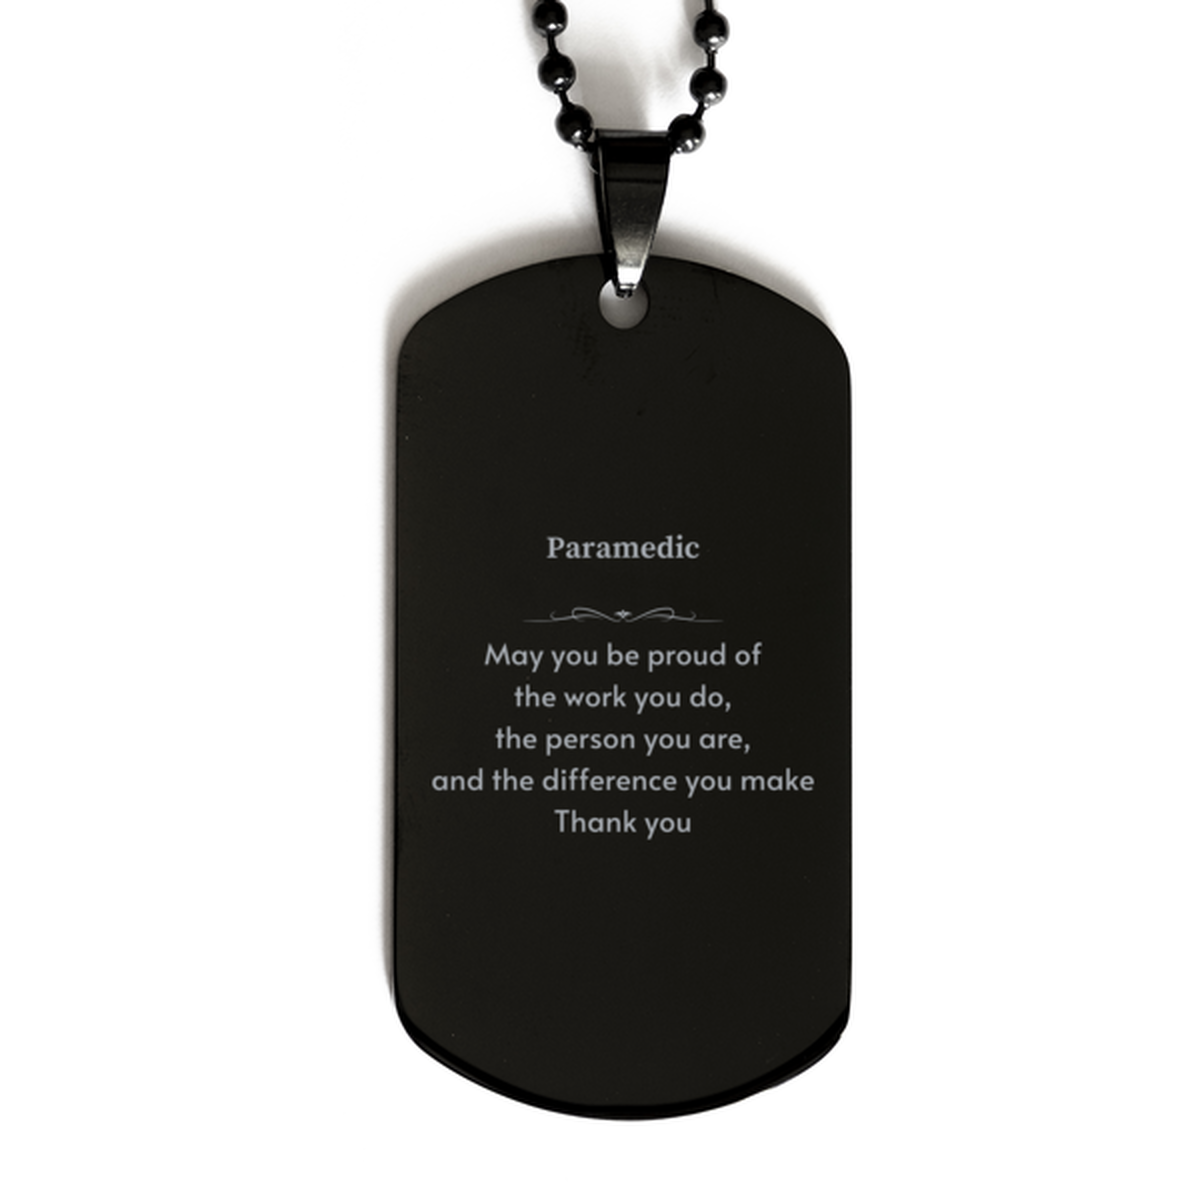 Heartwarming Black Dog Tag Retirement Coworkers Gifts for Paramedic, Paramedic May You be proud of the work you do, the person you are Gifts for Boss Men Women Friends